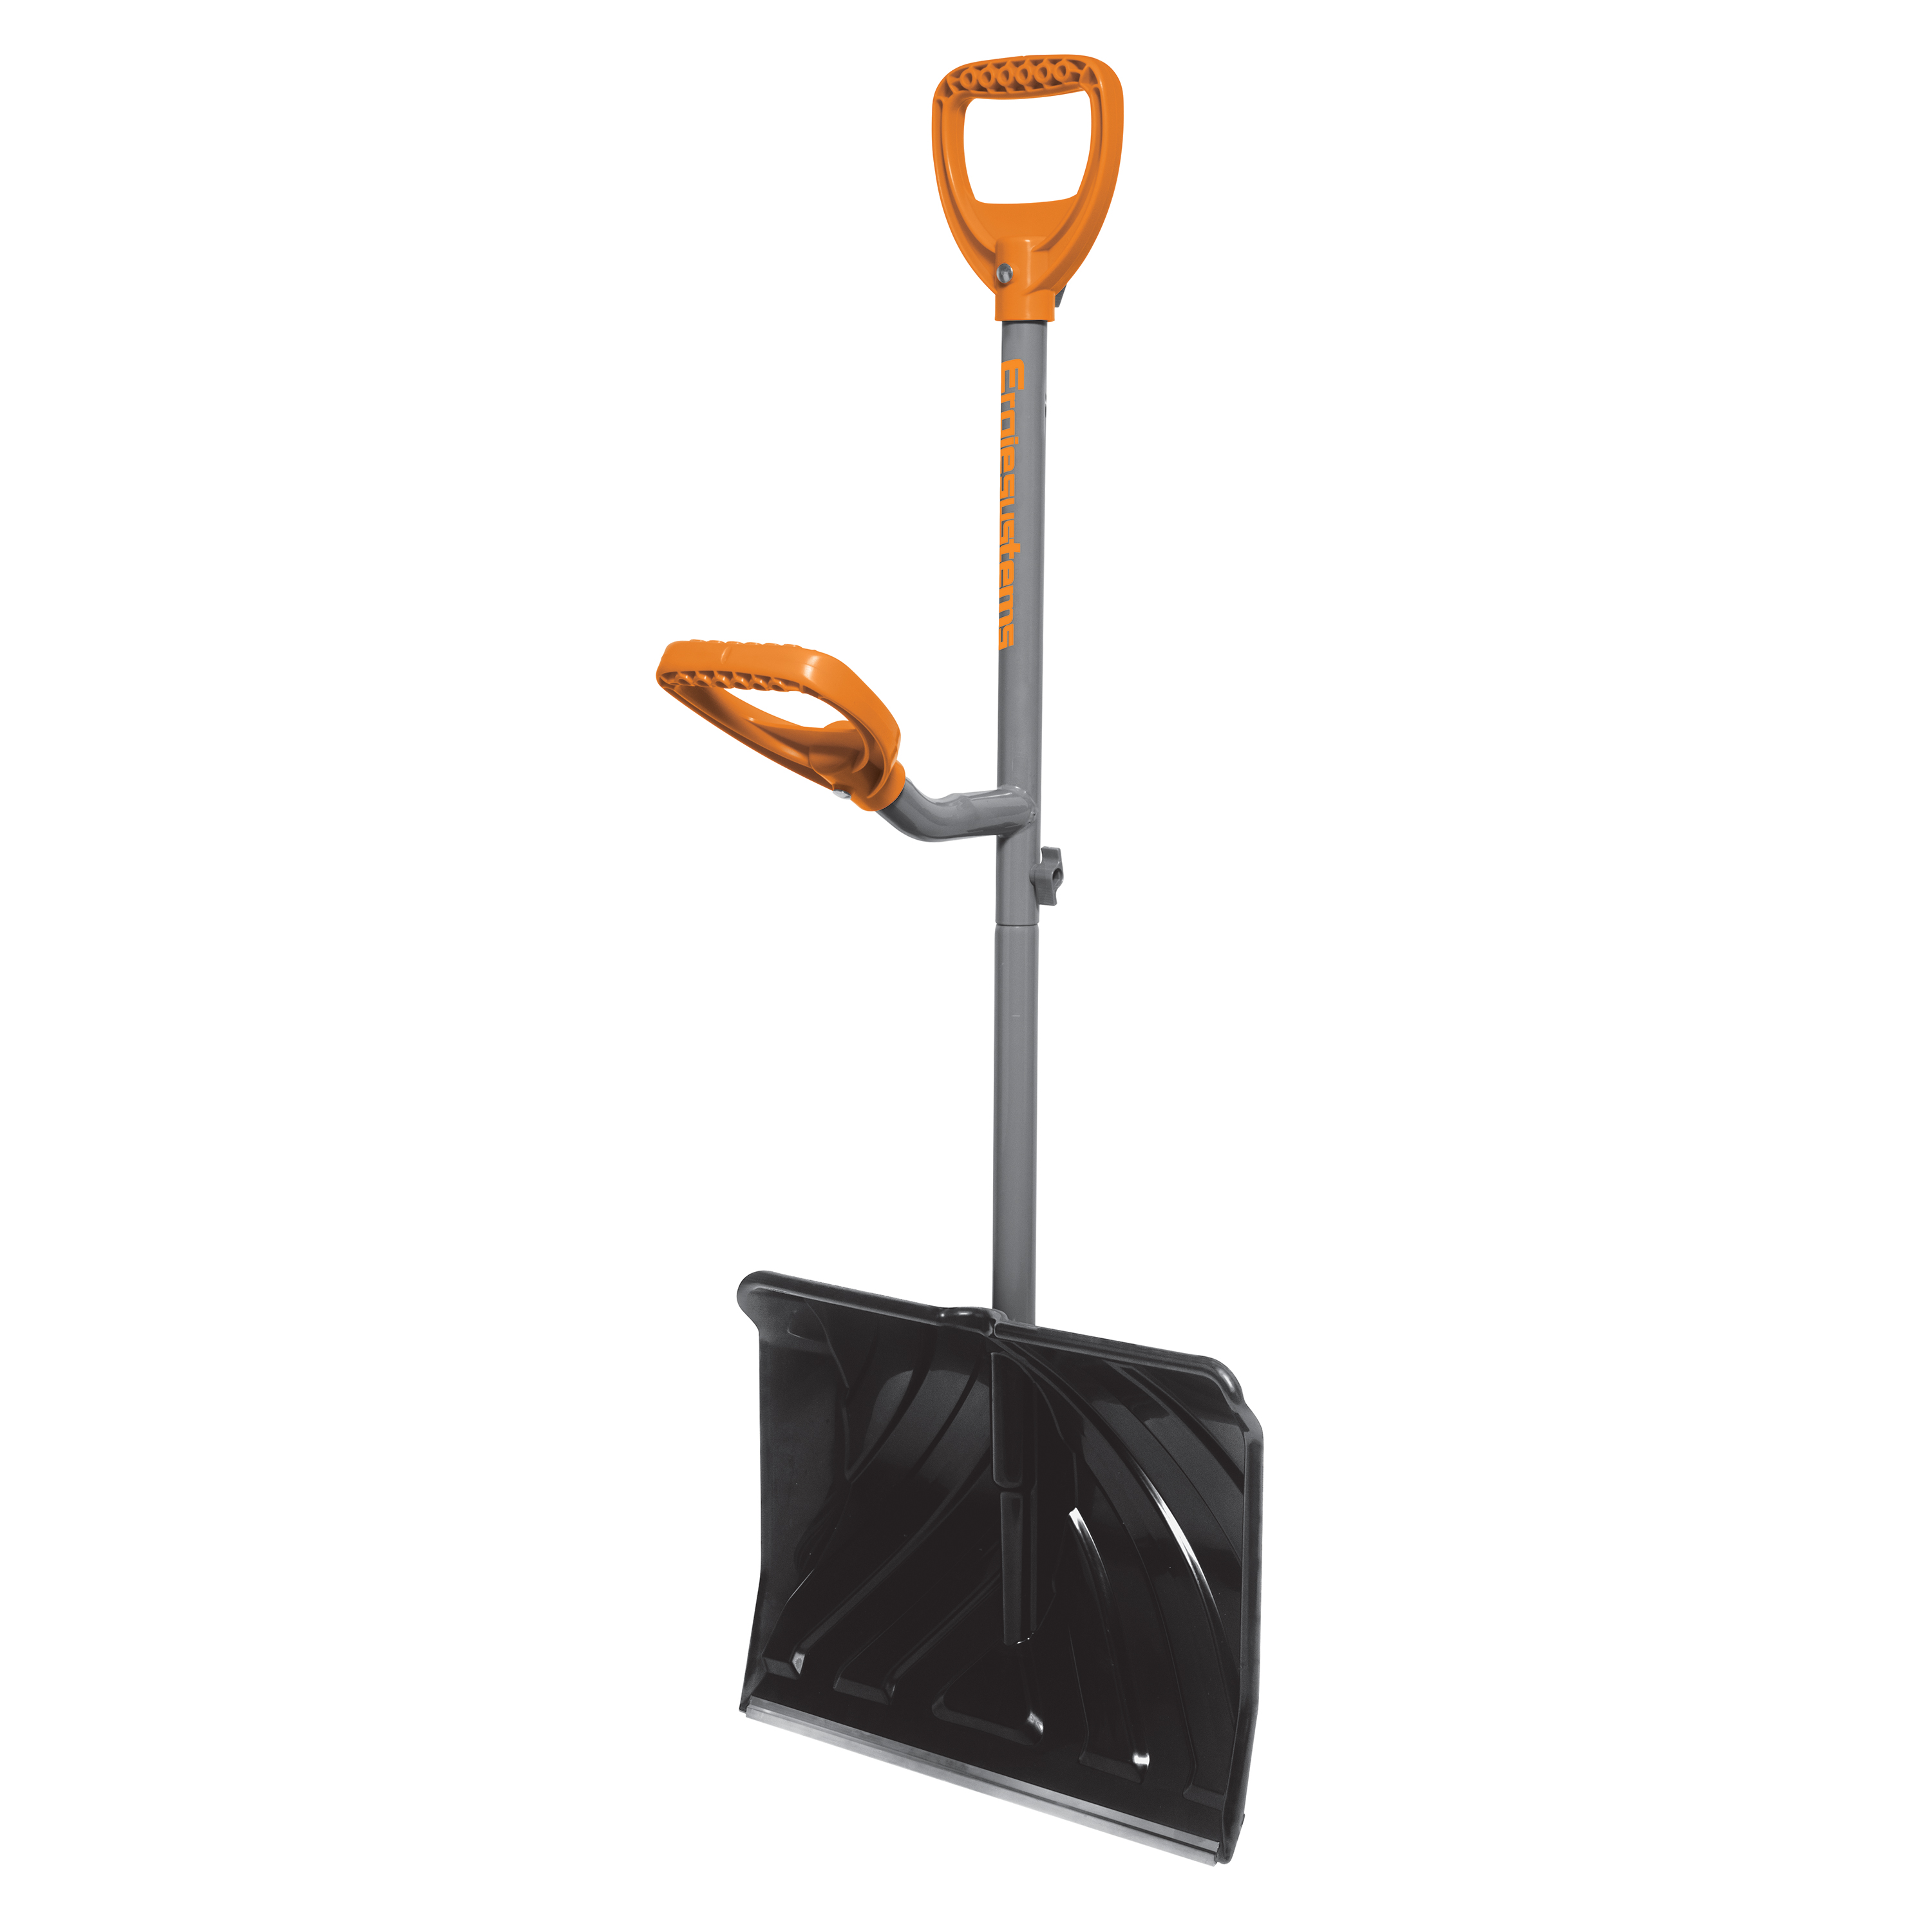 Ergie Systems 18" Impact-Resistant Snow Shovel, 34.5" Steel Shaft - image 4 of 10